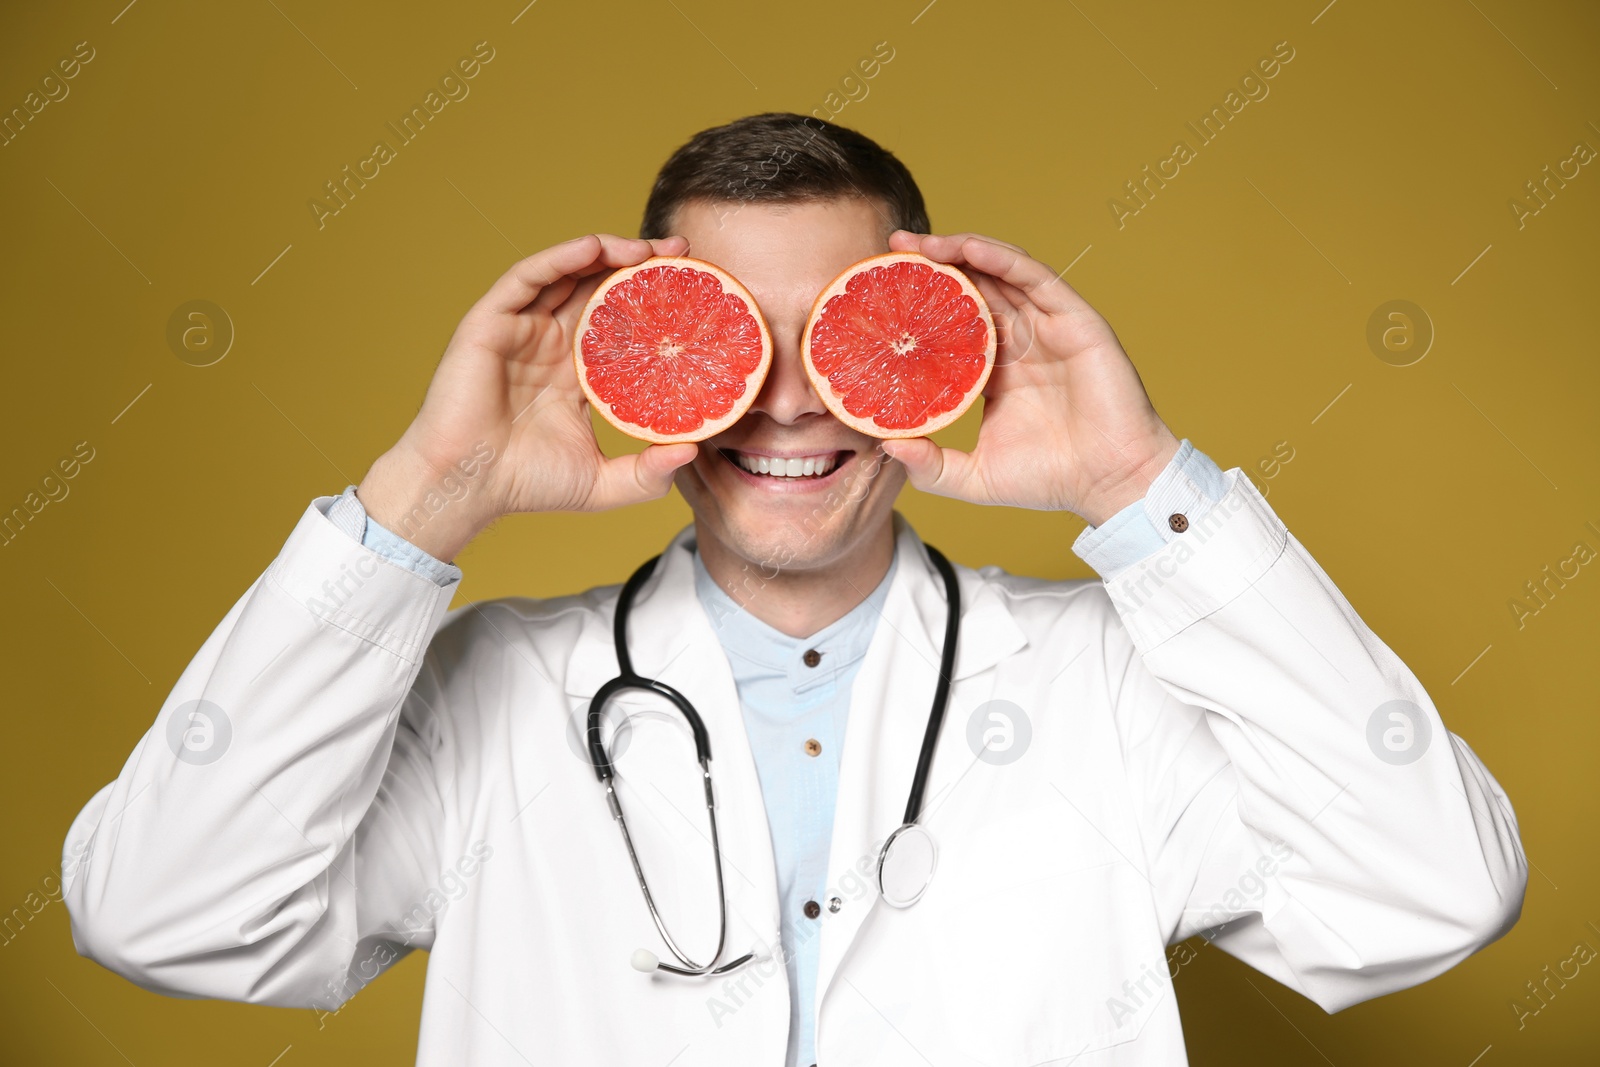 Photo of Nutritionist posing with halves of ripe grapefruit on yellow background